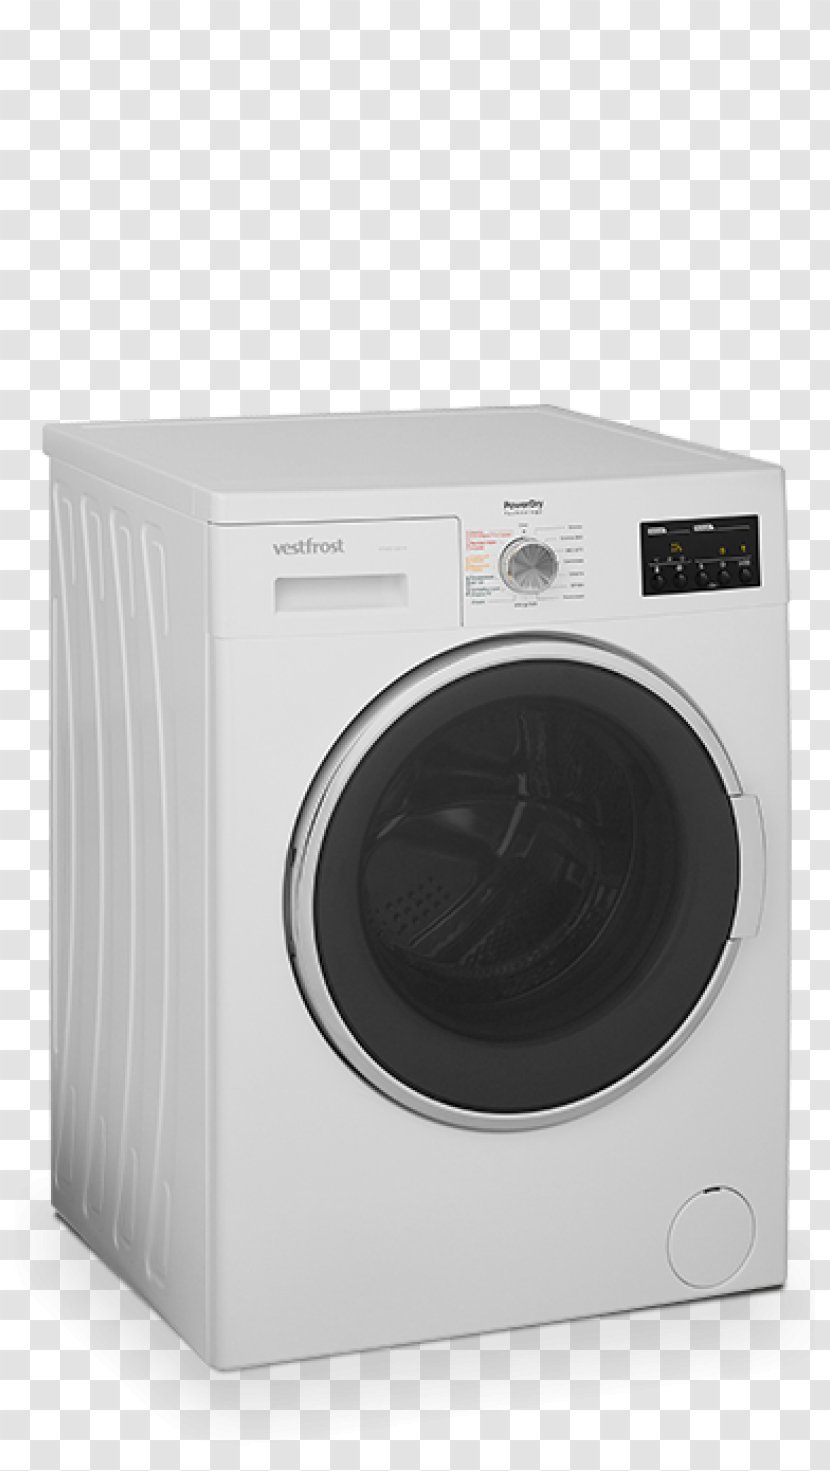 Washing Machines Clothes Dryer Vestfrost Laundry Drying - Machine Transparent PNG